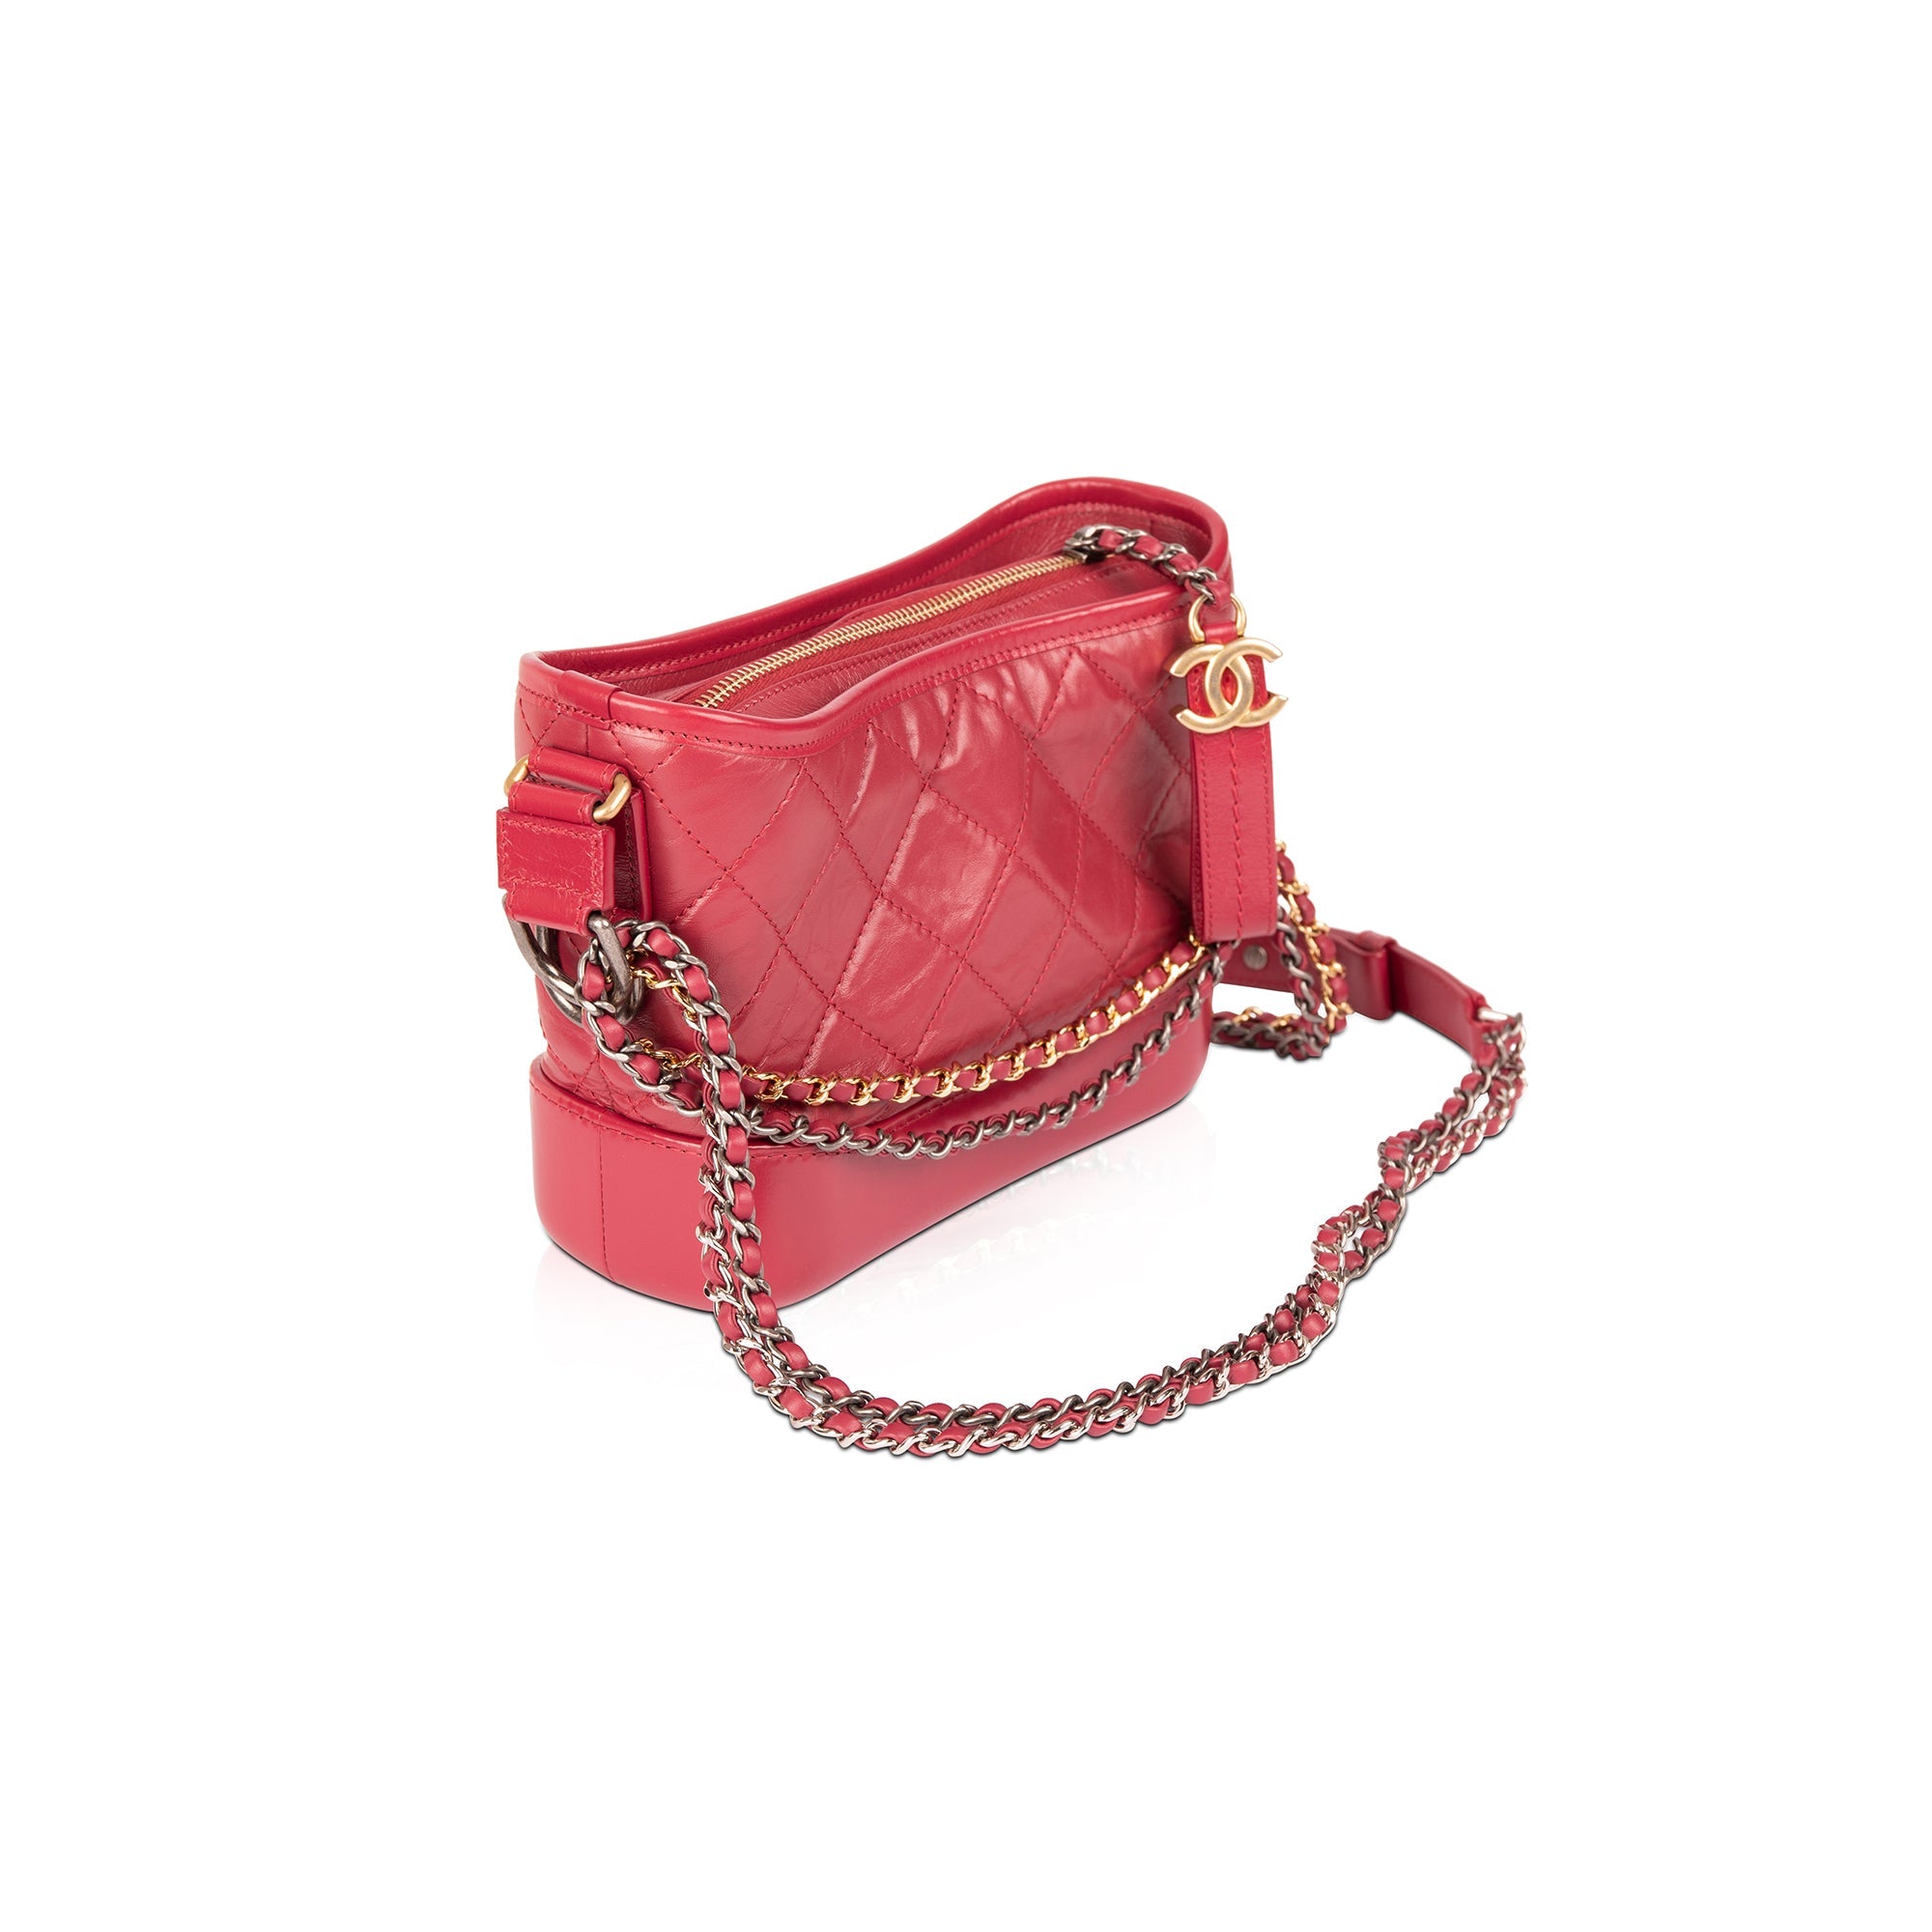 Chanel Small Gabrielle Hobo – Oliver Jewellery